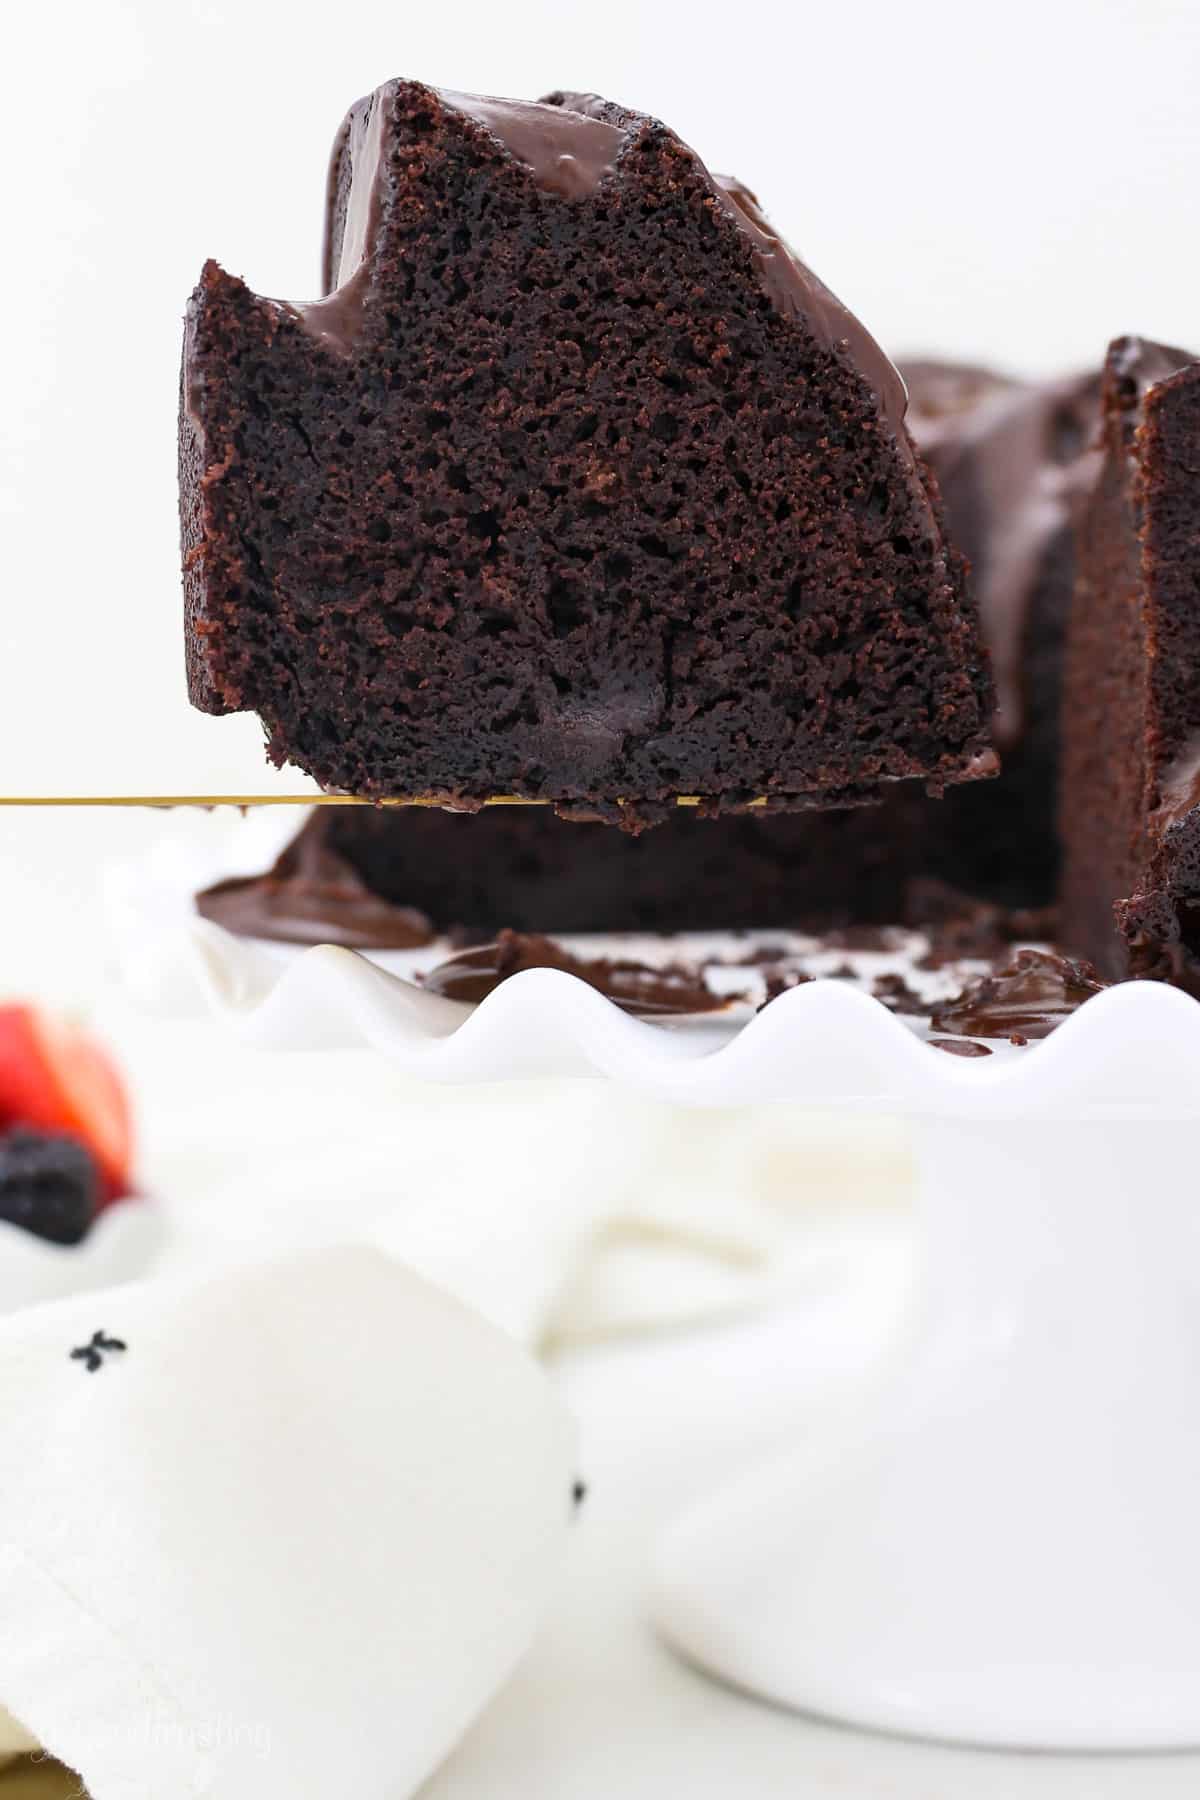 A slice of chocolate bundt cake is lifted from the rest of the cake on a cake stand.